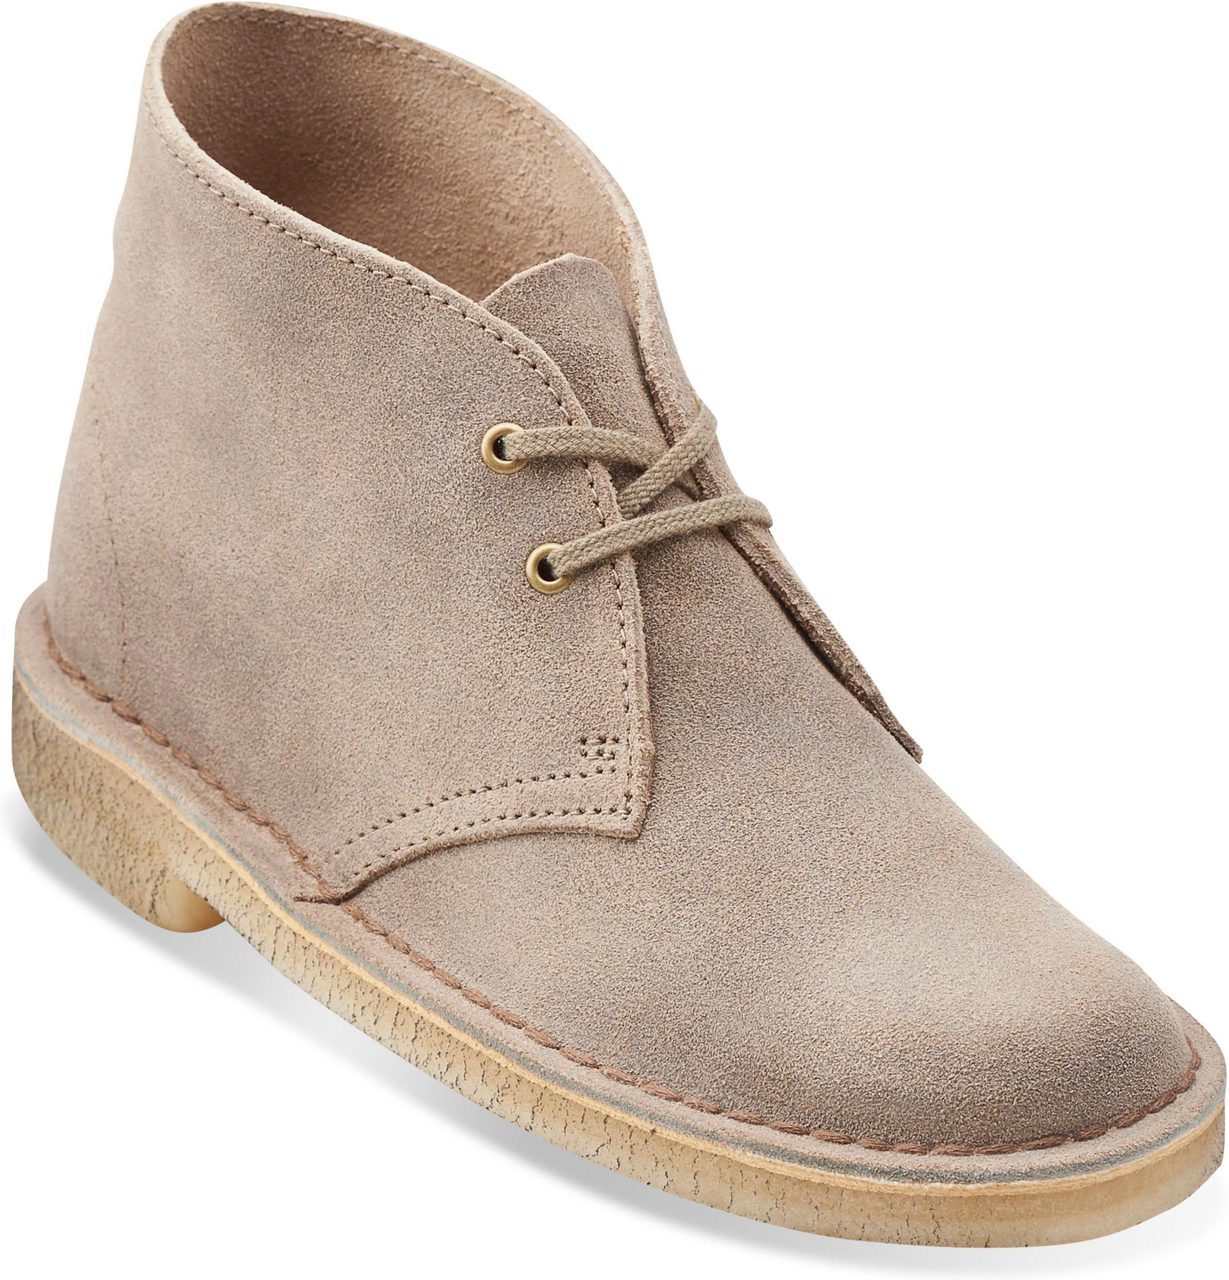 Clarks Women's Desert Boot in Taupe Distressed